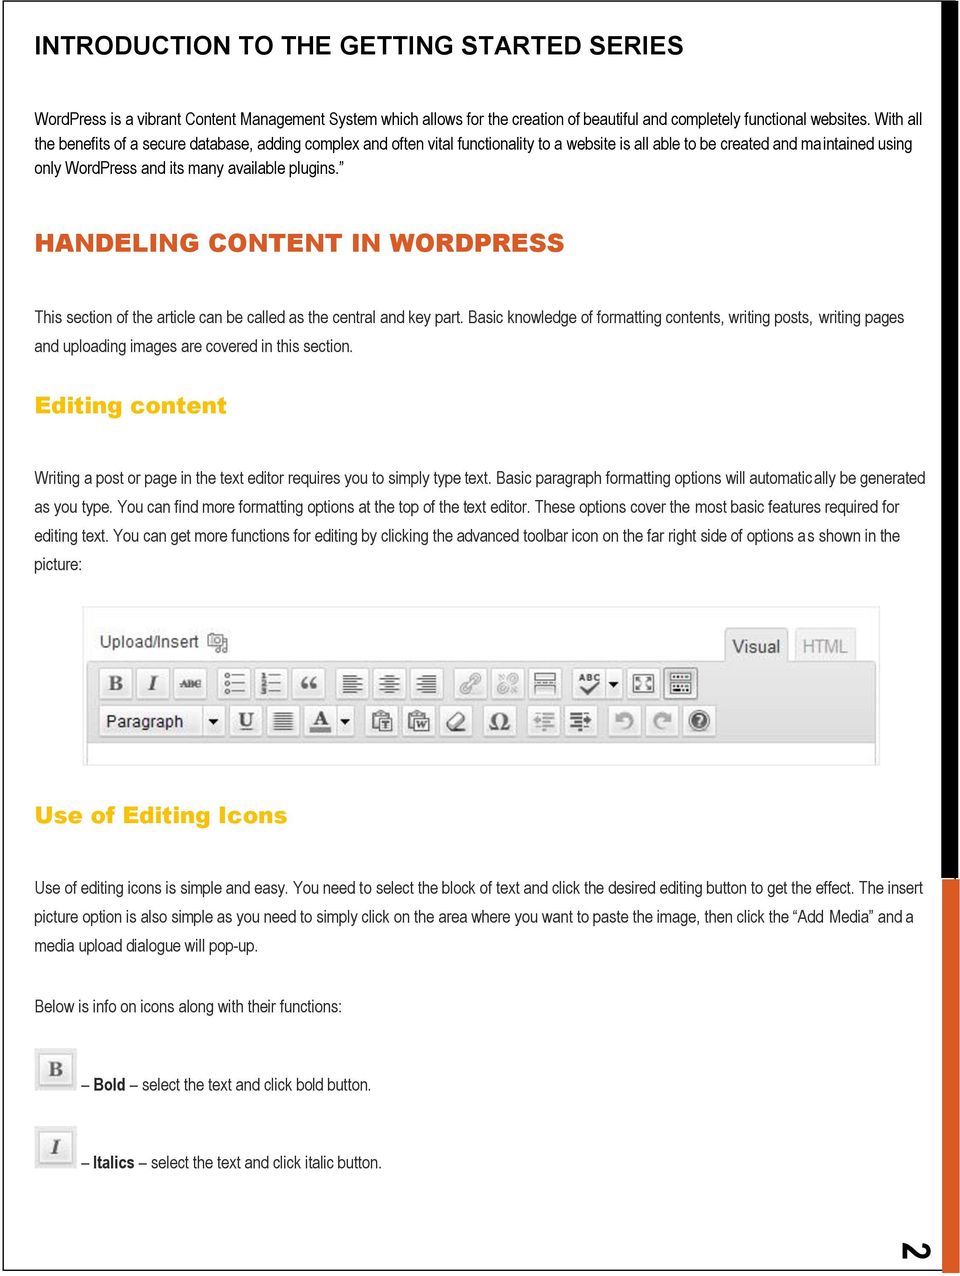 HANDELING CONTENT IN WORDPRESS This section of the article can be called as the central and key part.